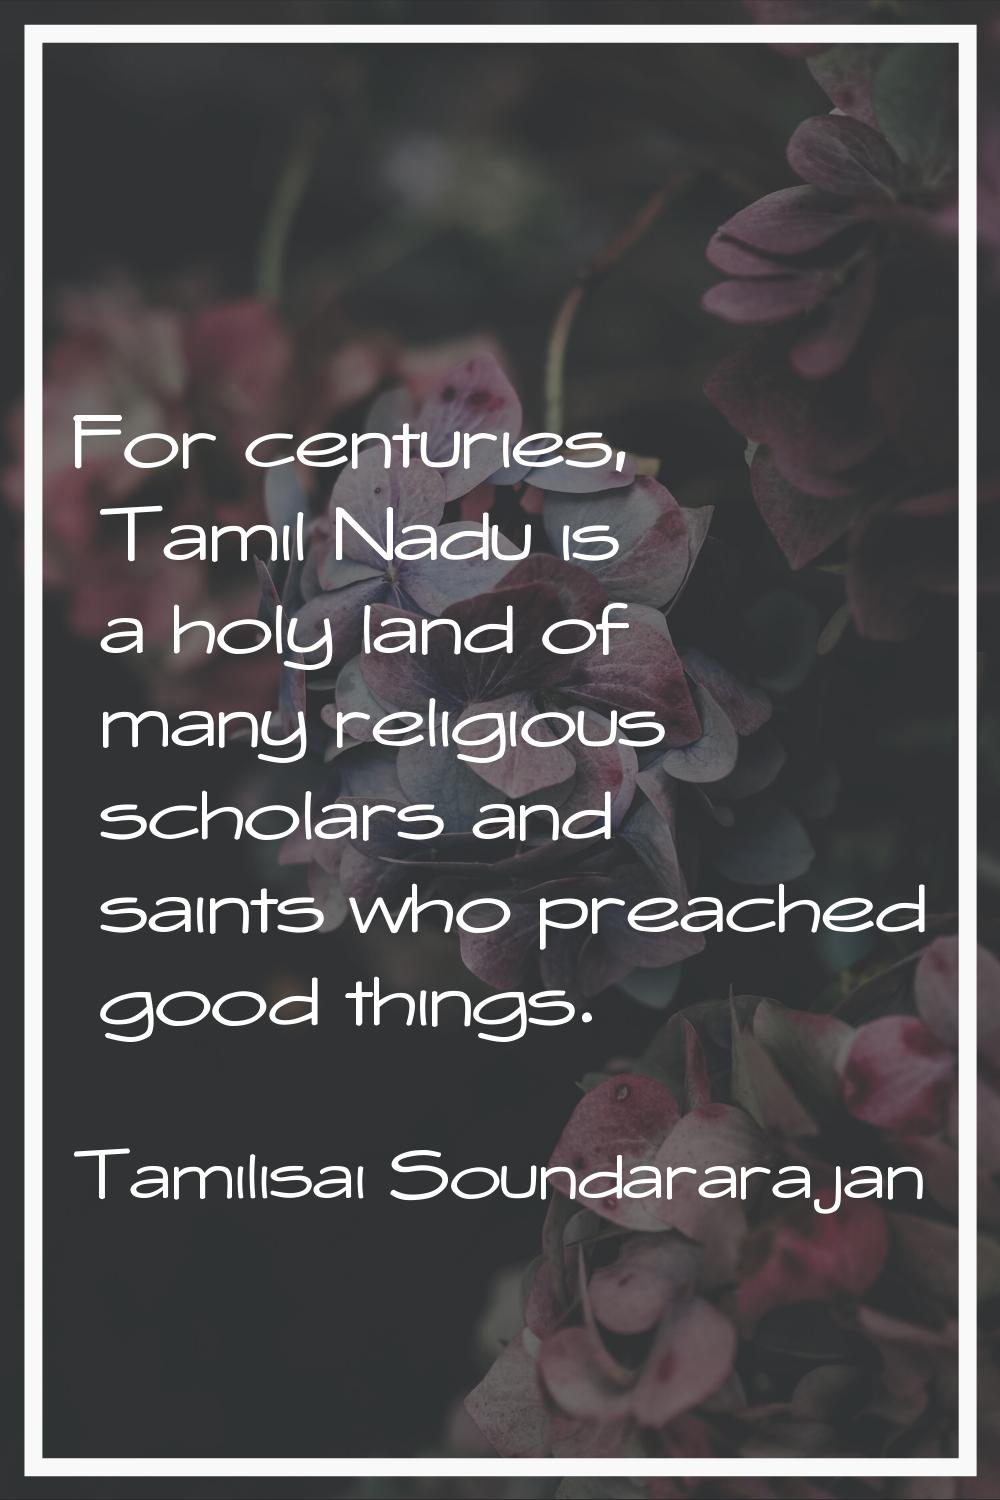 For centuries, Tamil Nadu is a holy land of many religious scholars and saints who preached good th